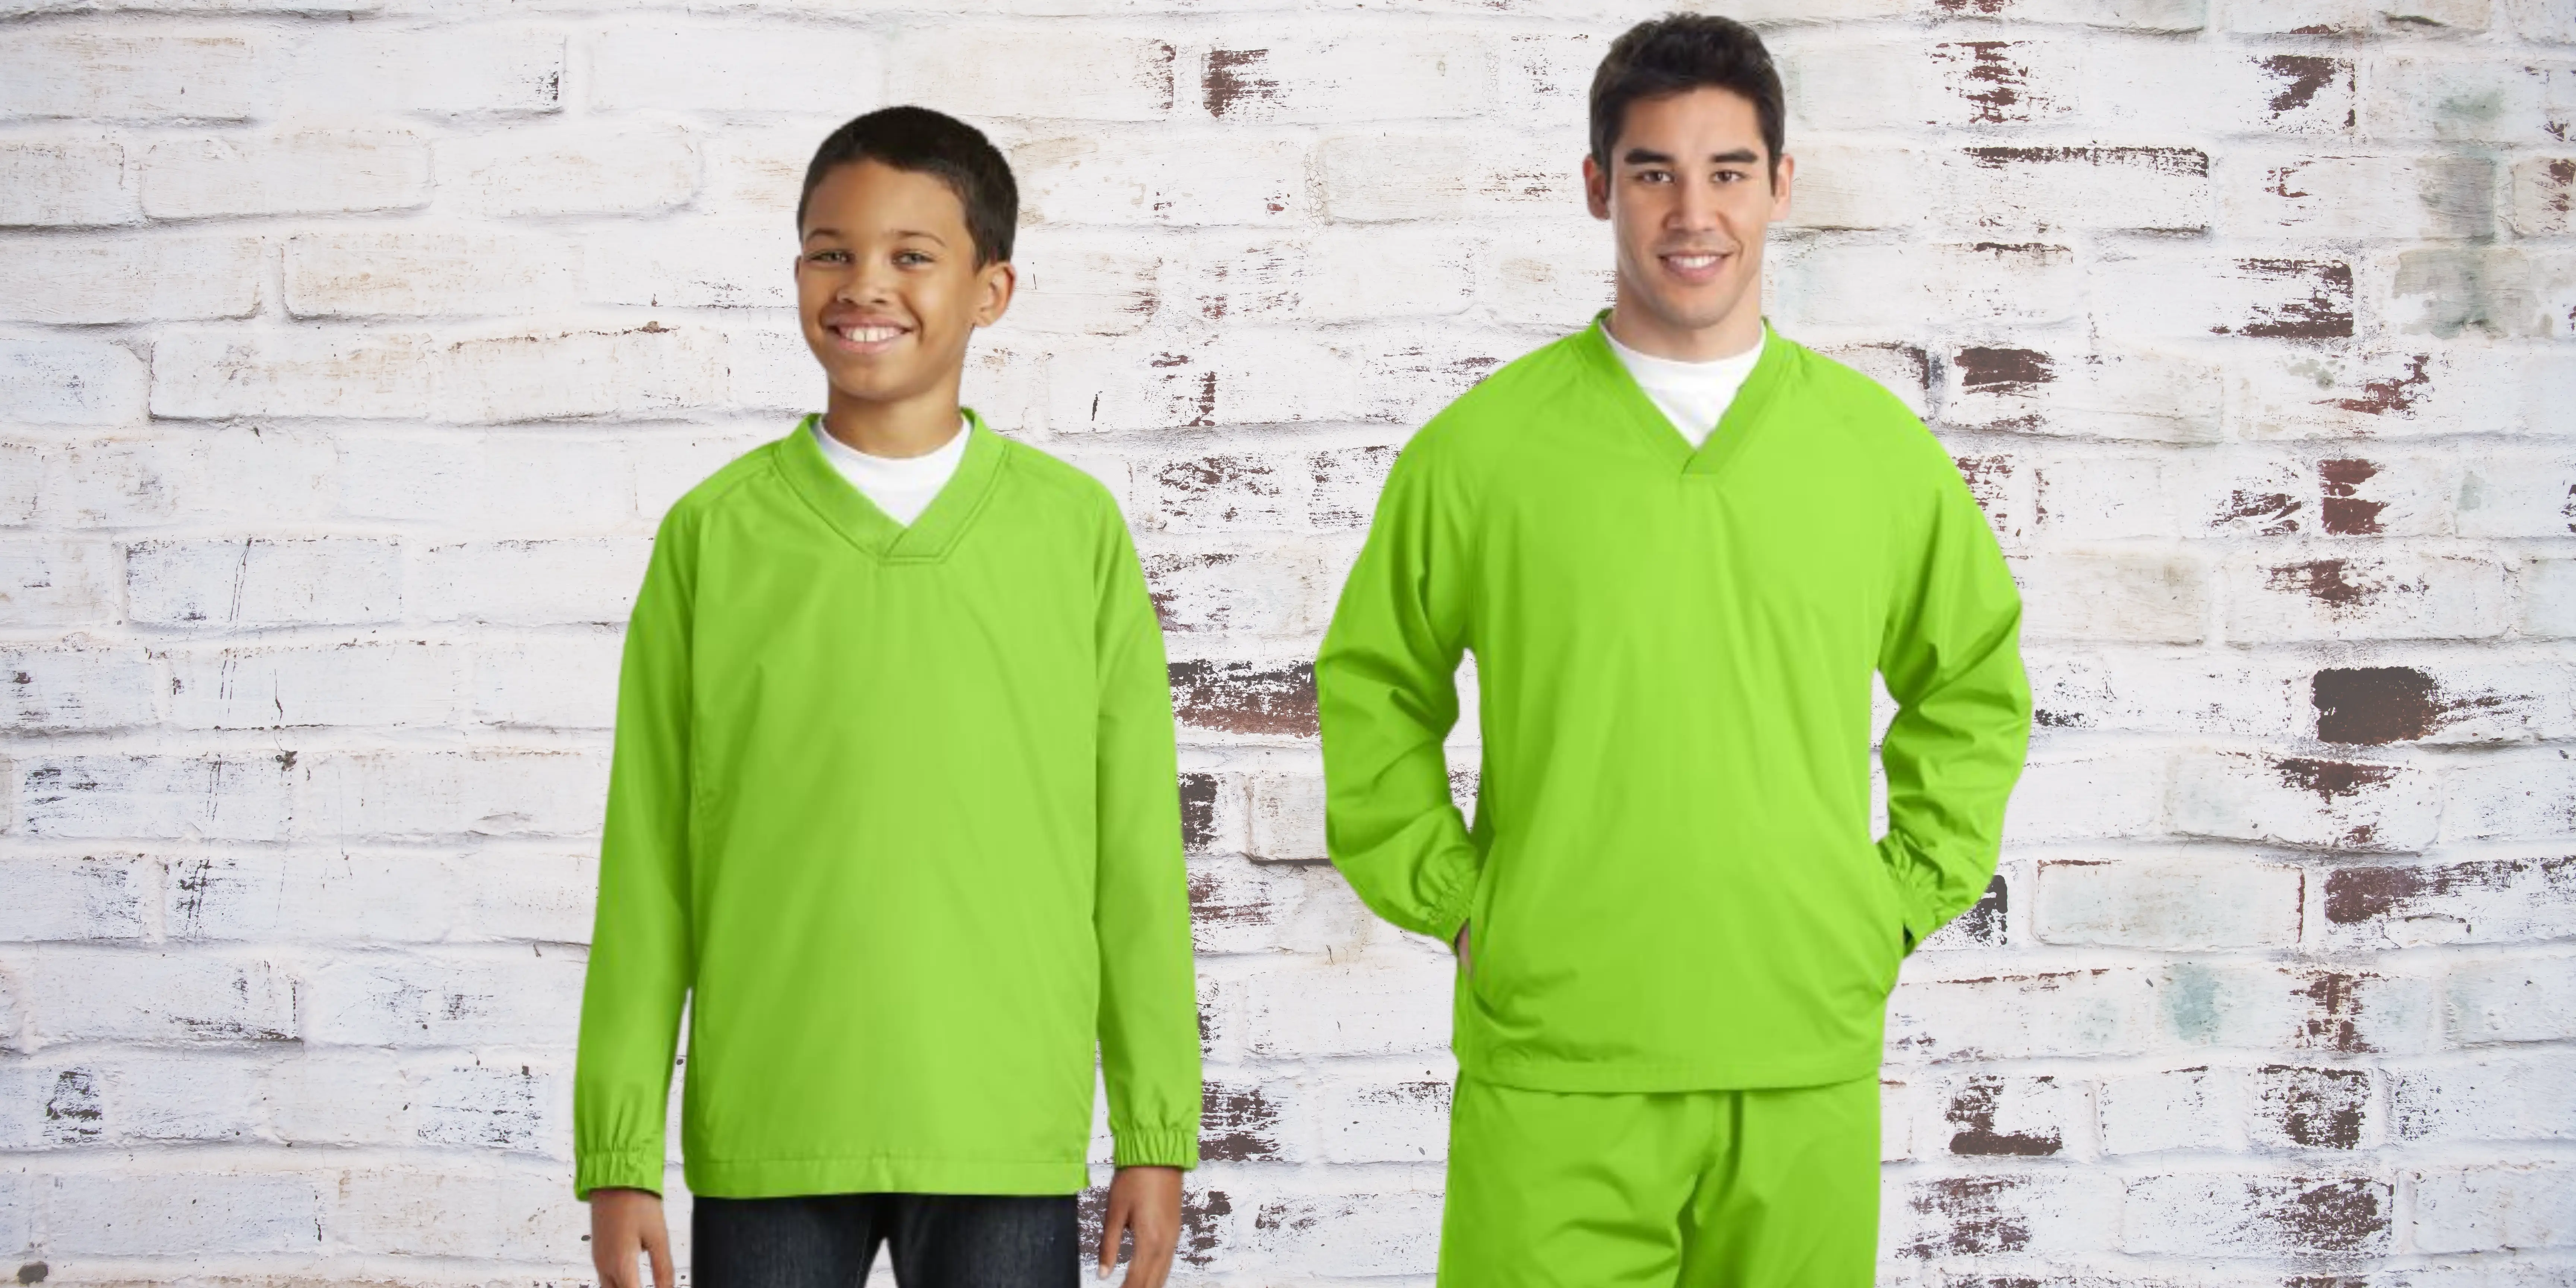 a man and boy in matching green shirts